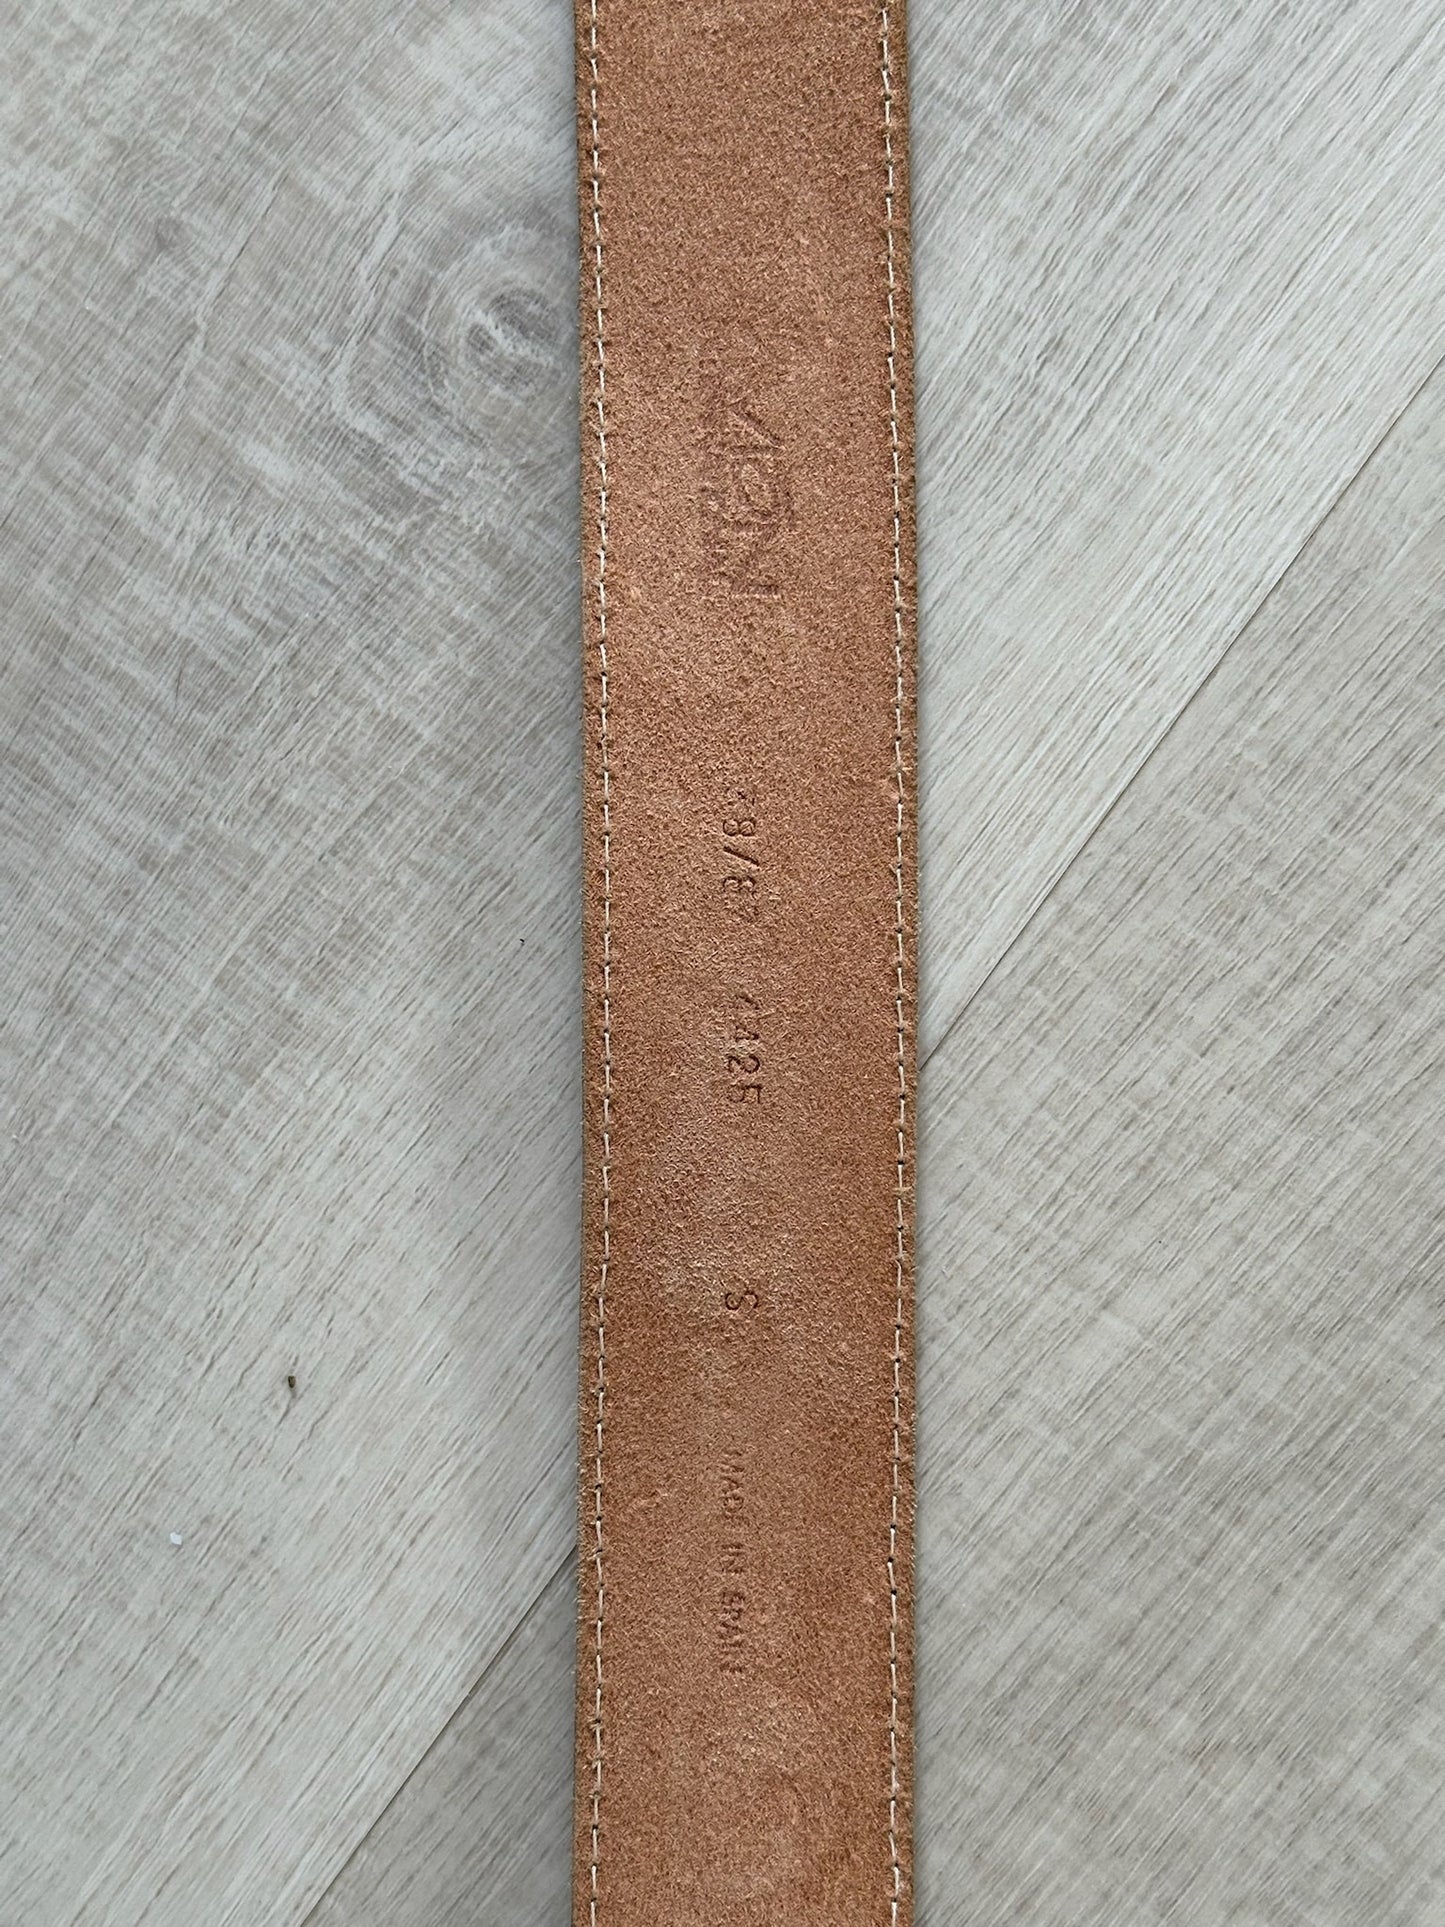 The Orion Brown Leather Belt